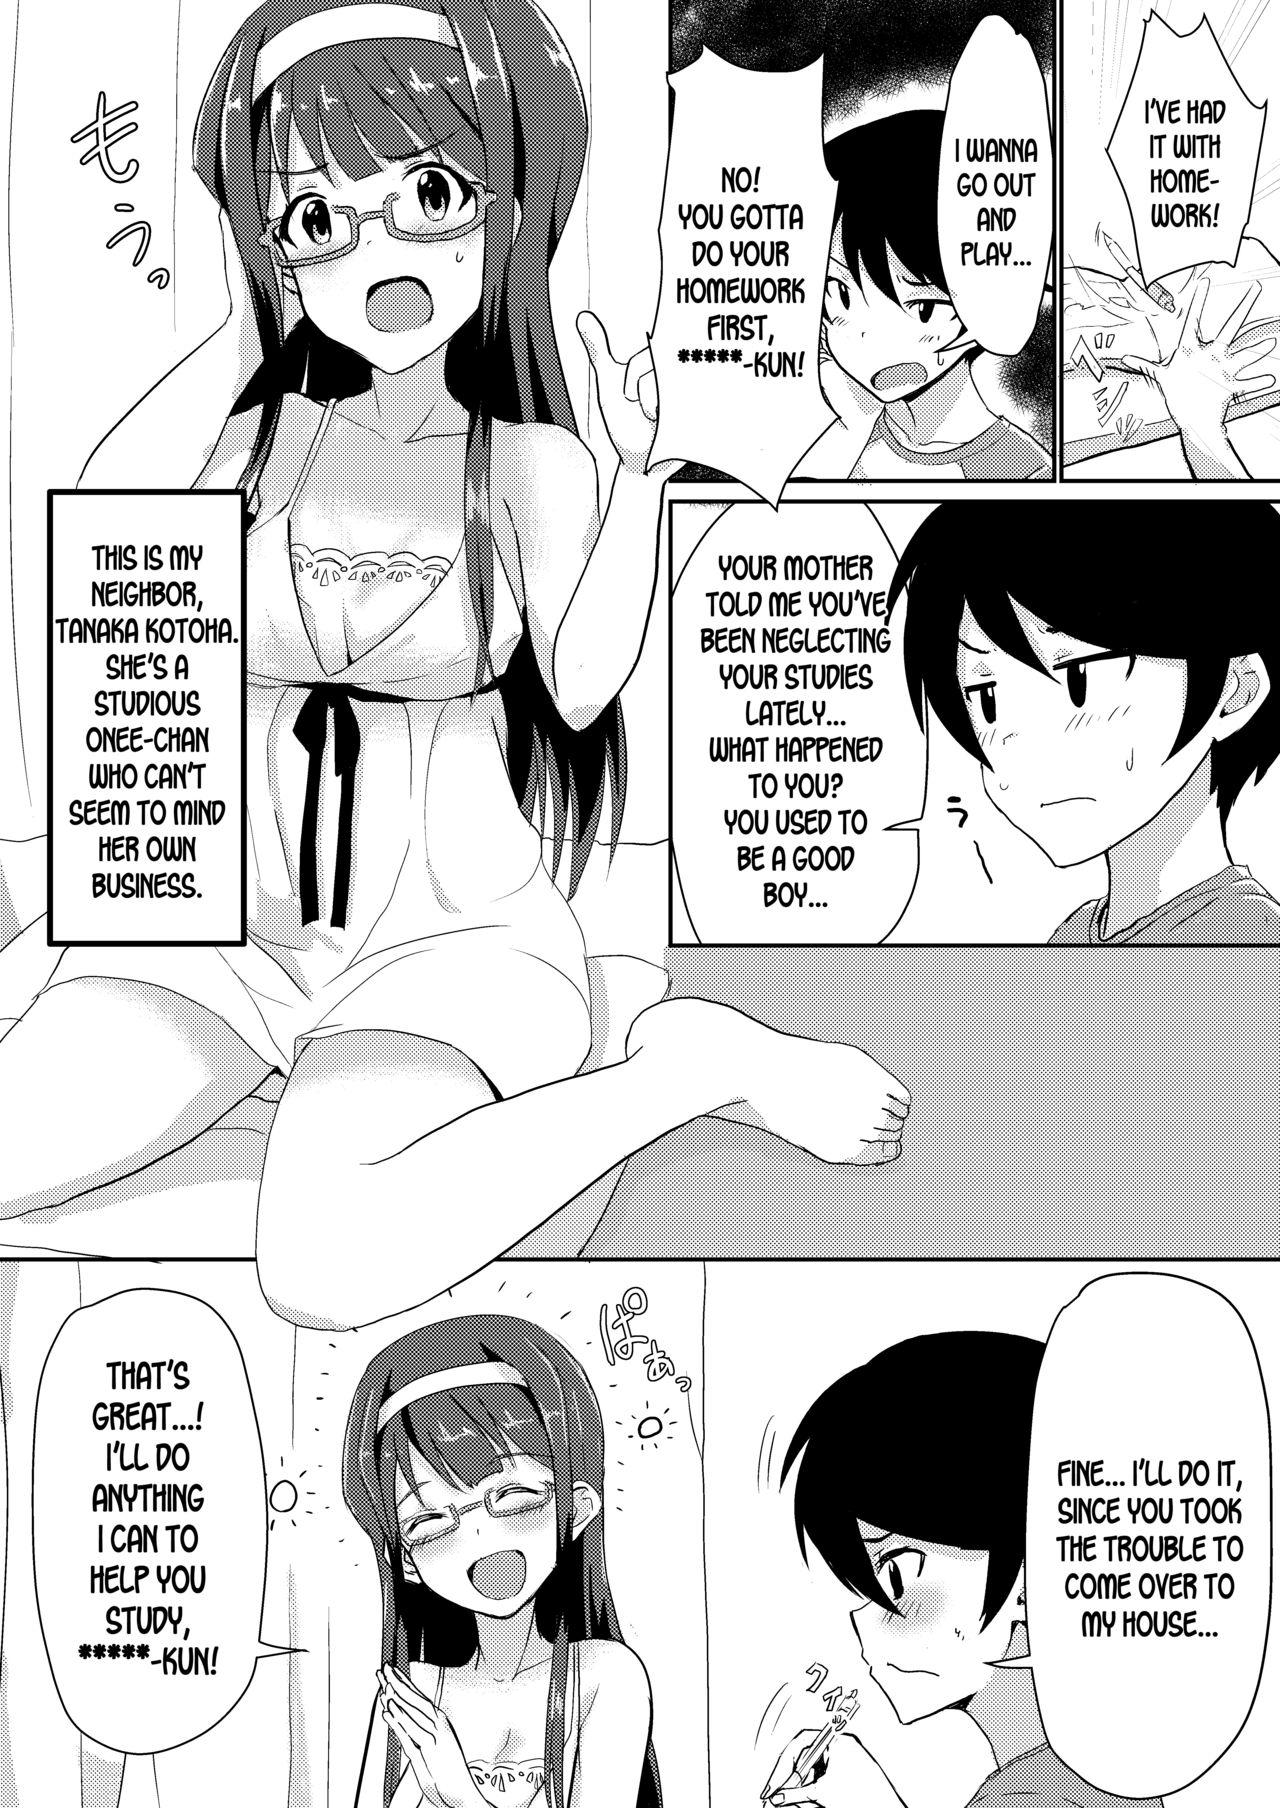 Bed HOME WORK - The idolmaster Short Hair - Page 2